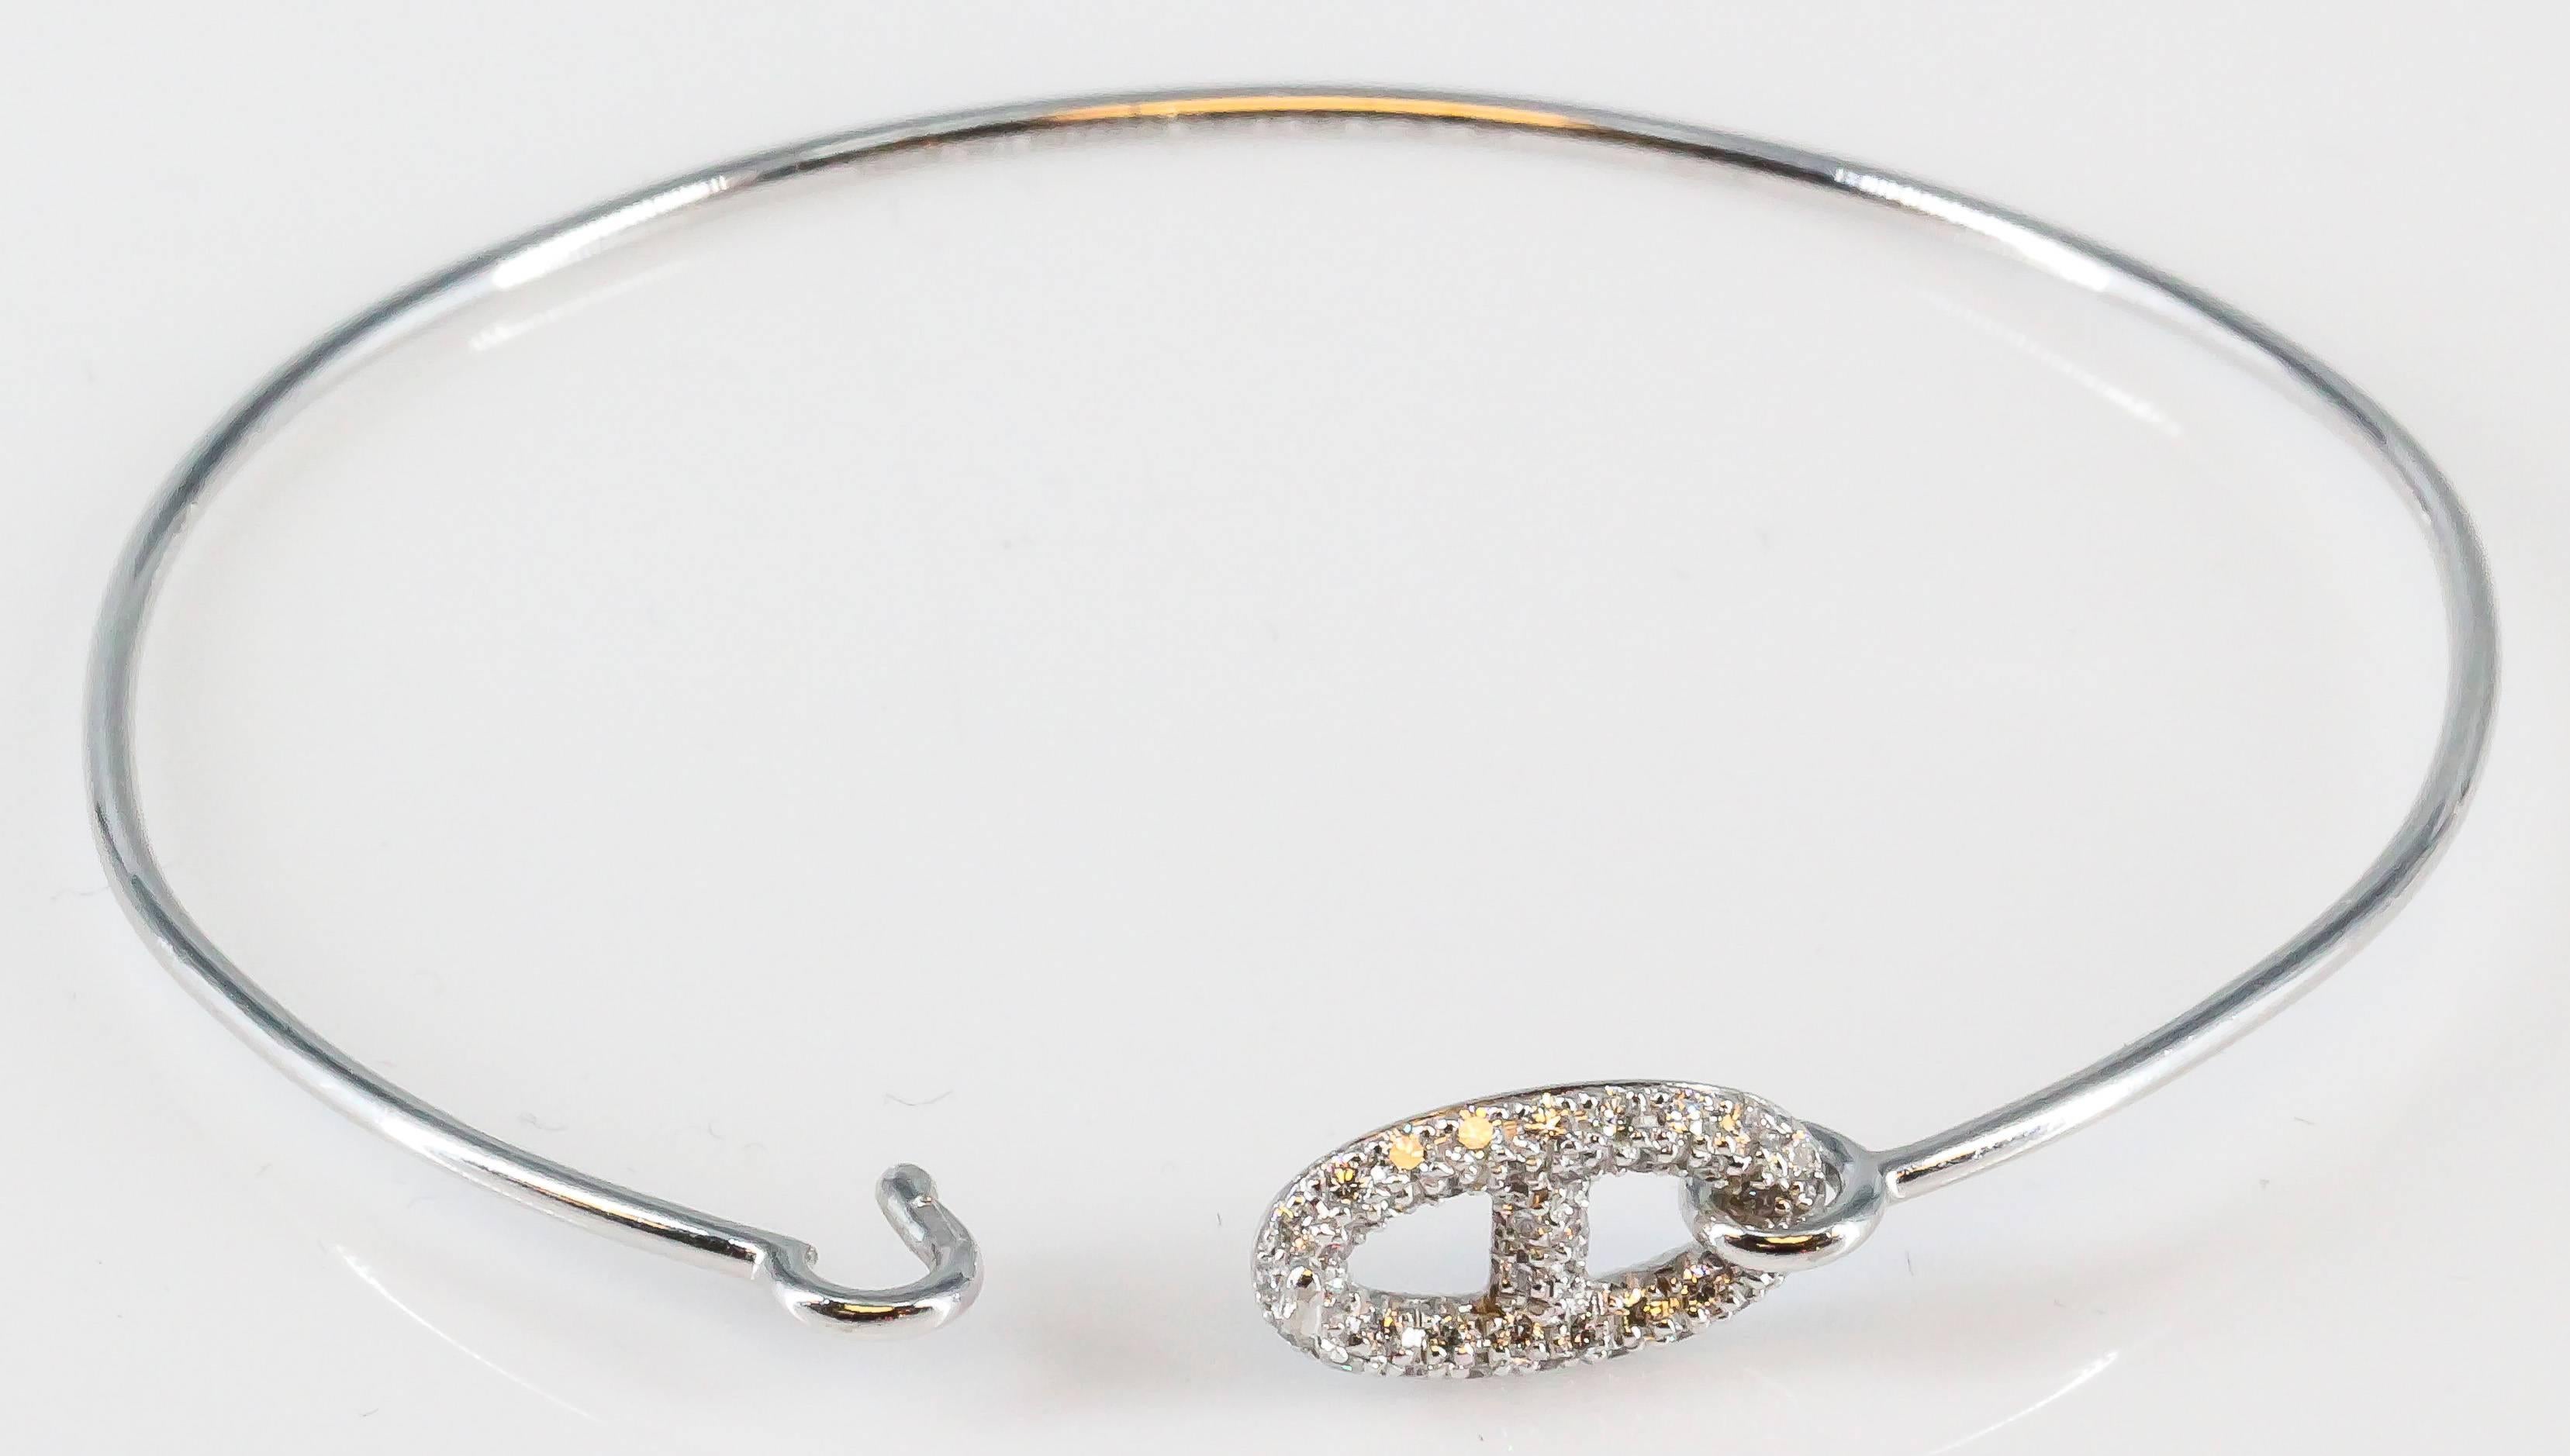 Refined diamond and 18K white gold bangle bracelet from the "ronde" collection by Hermes. It feature high grade round brilliant cut diamonds, approx. 0.32cts total weight. The design draws inspiration from a ship's anchor chain to create a